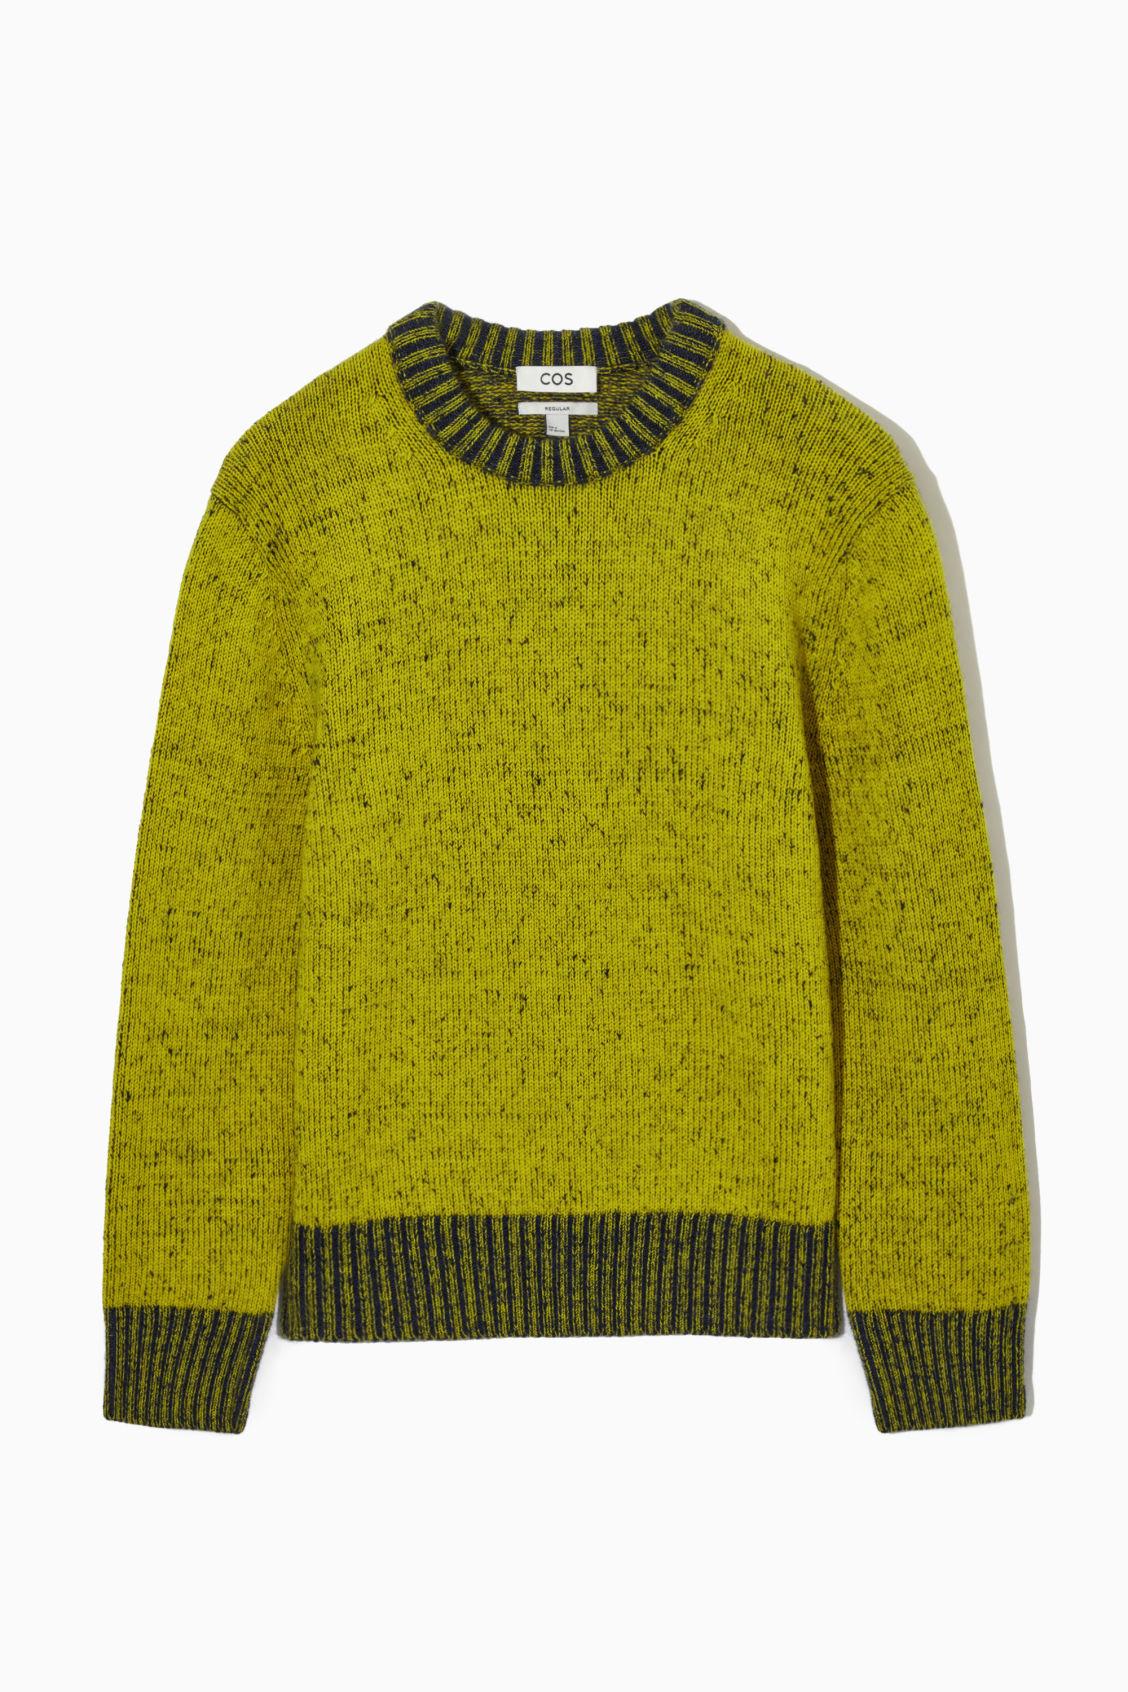 COS Mohair And Wool-blend Crew Neck Sweater in Green for Men | Lyst